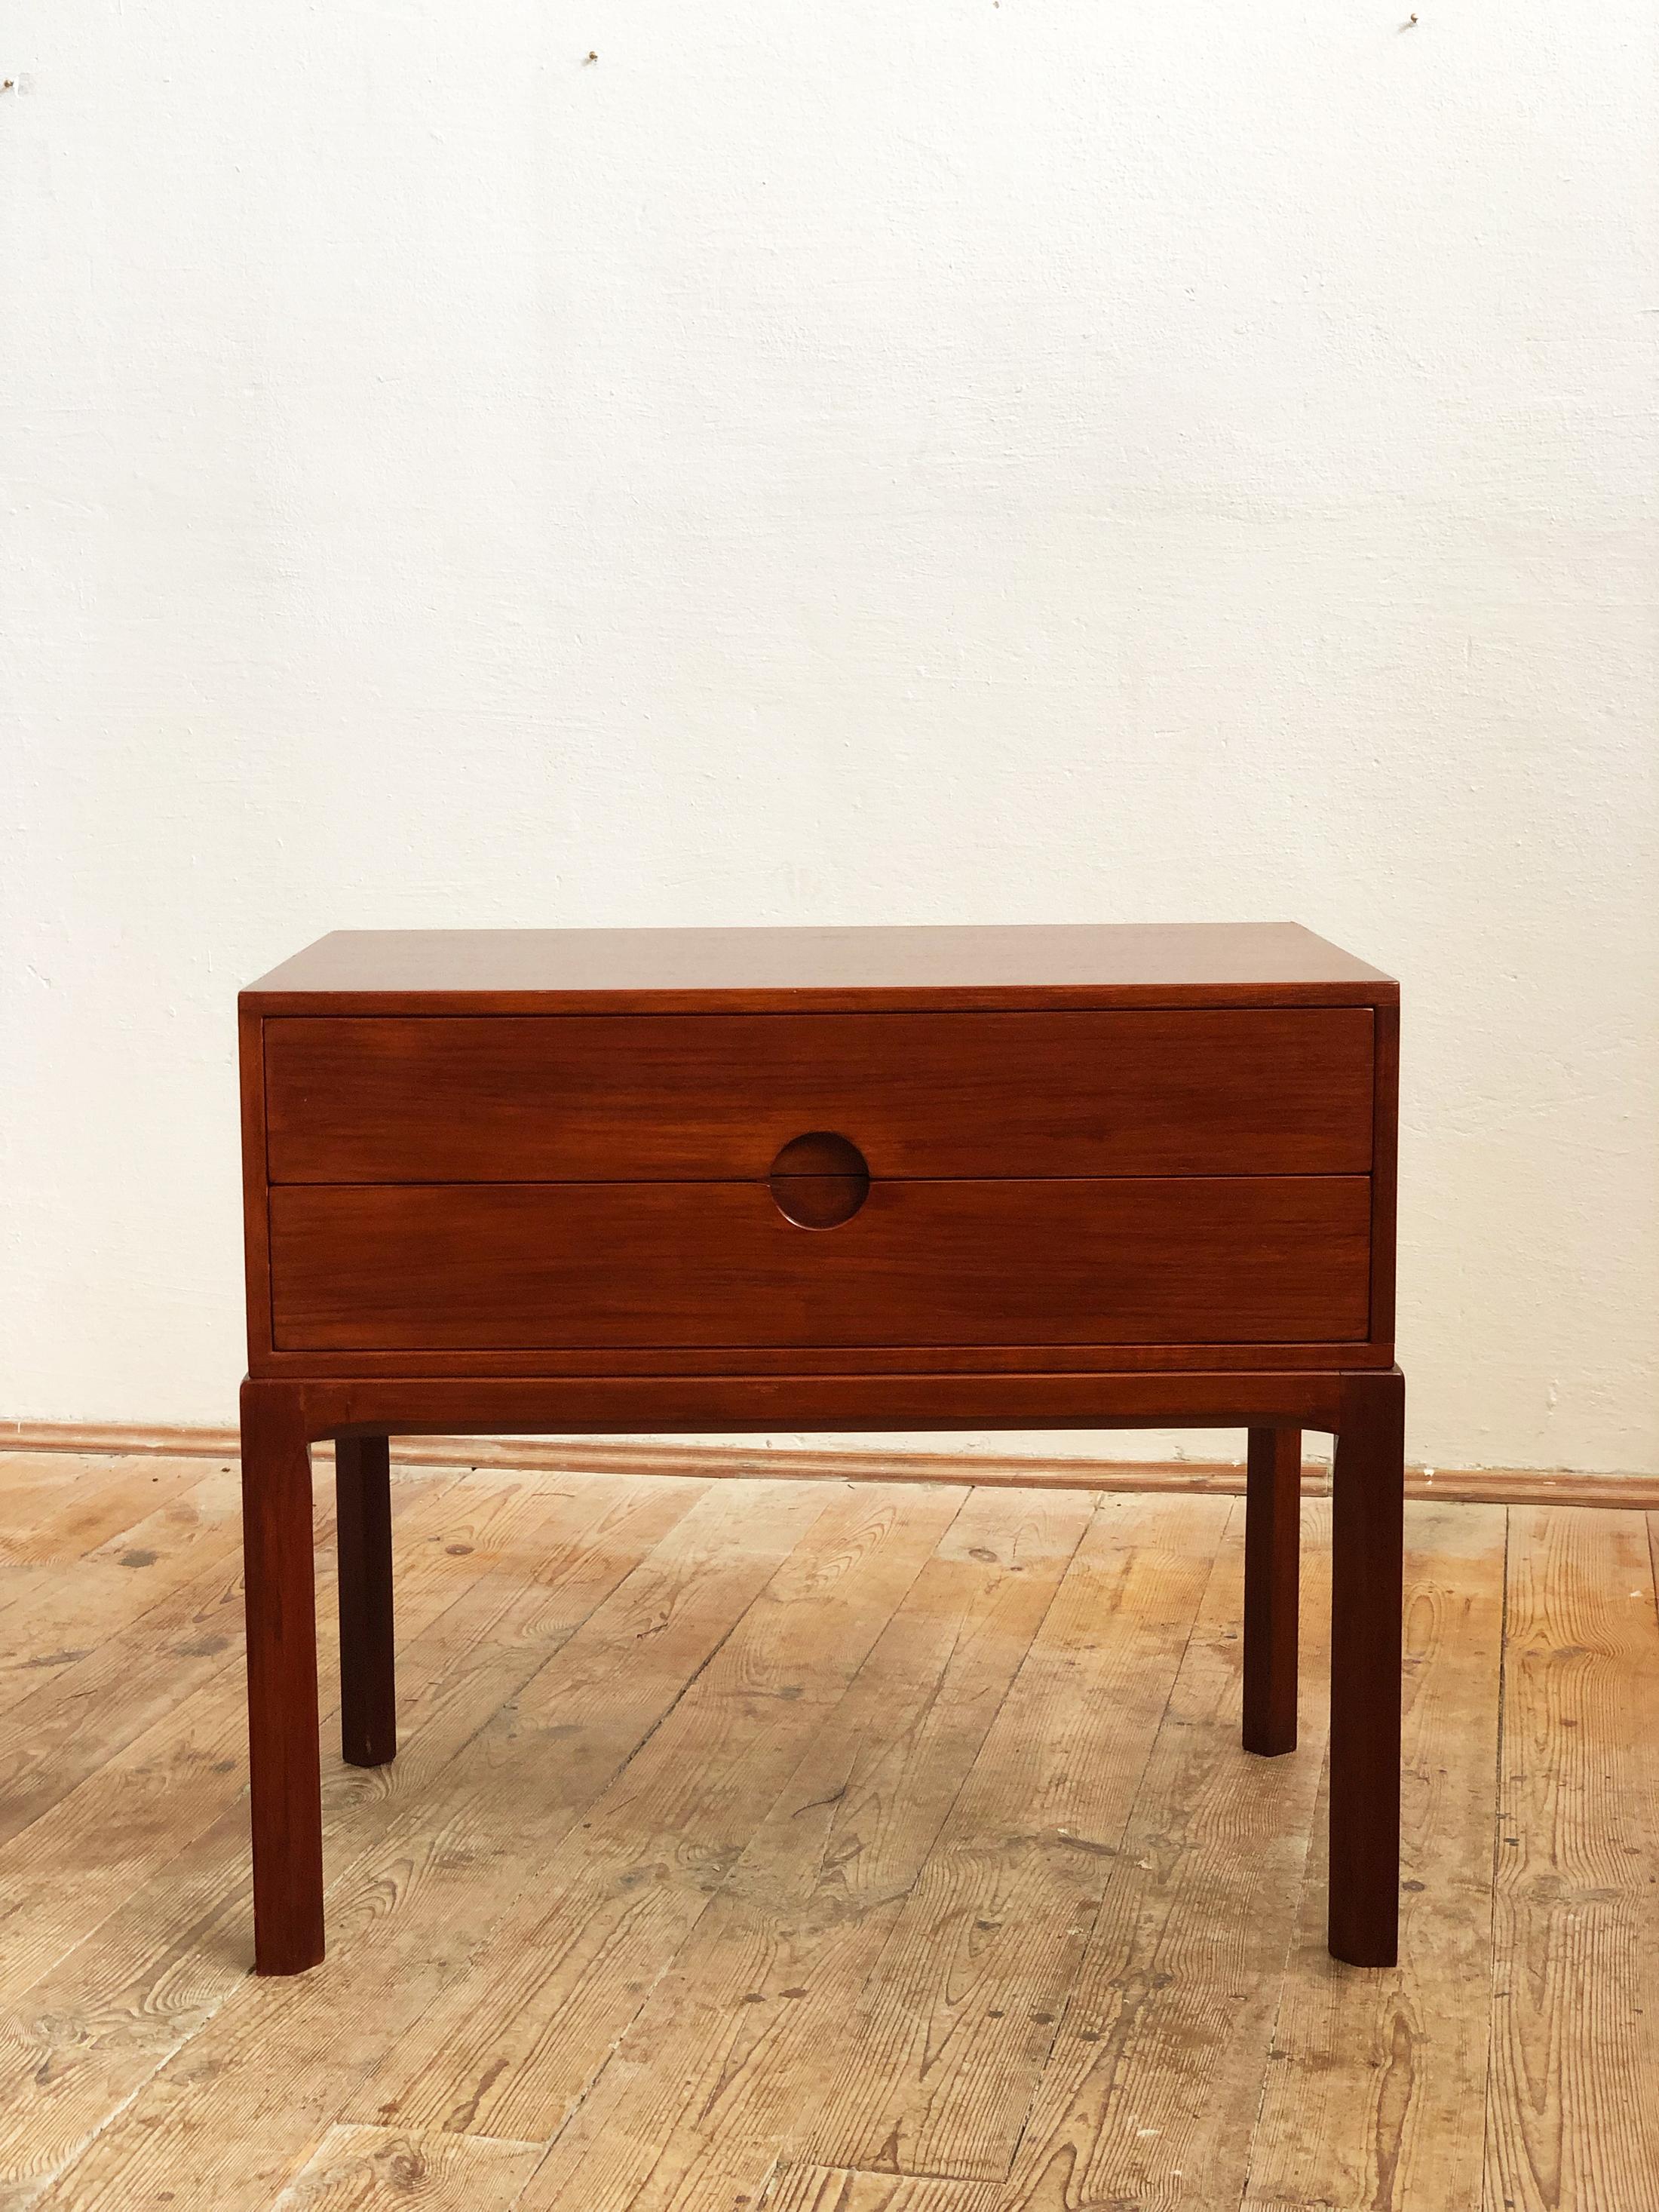 Small Teak Chest of Drawers, Sideboard by Kai Kristiansen for Aksel Kjersgaard In Good Condition For Sale In Munich, Bavaria